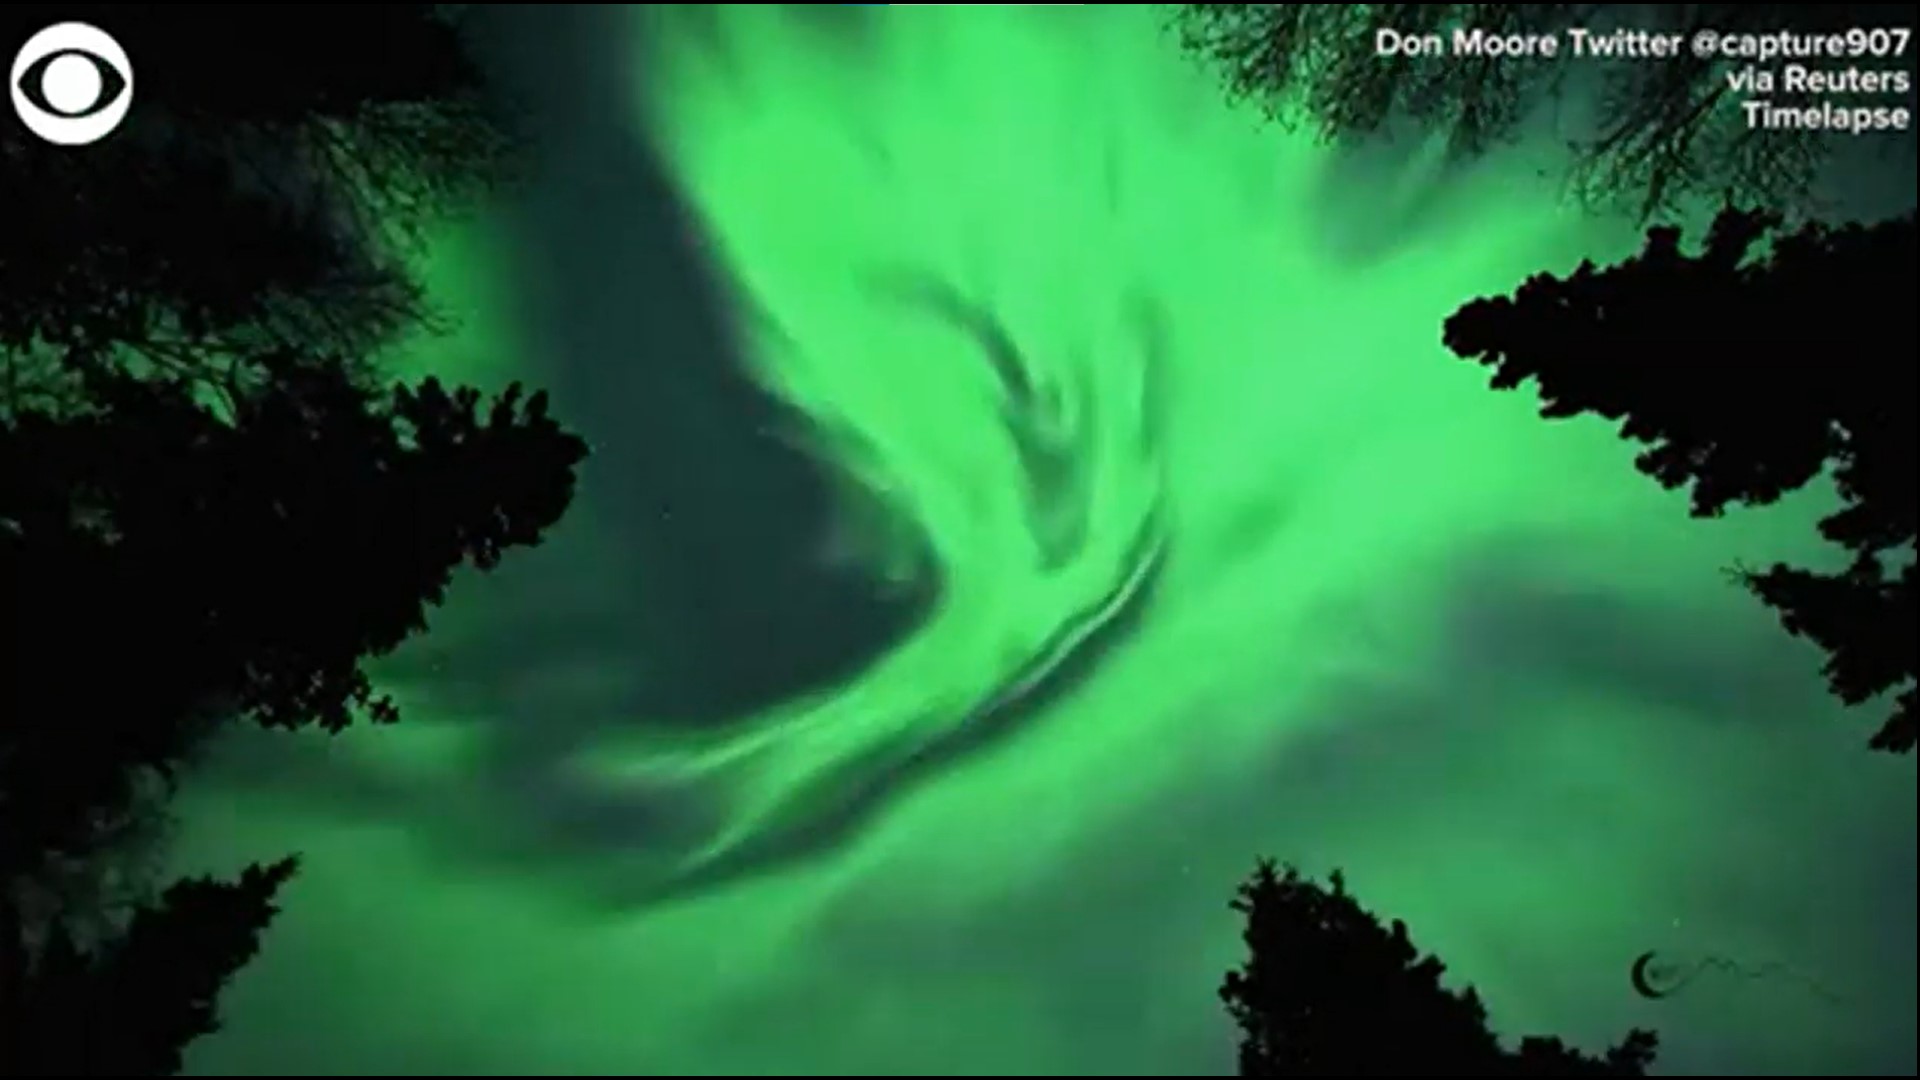 AURORA BOREALIS: An eyewitness captured timelapse footage of the northern lights in the sky over Anchorage, Alaska, recently.